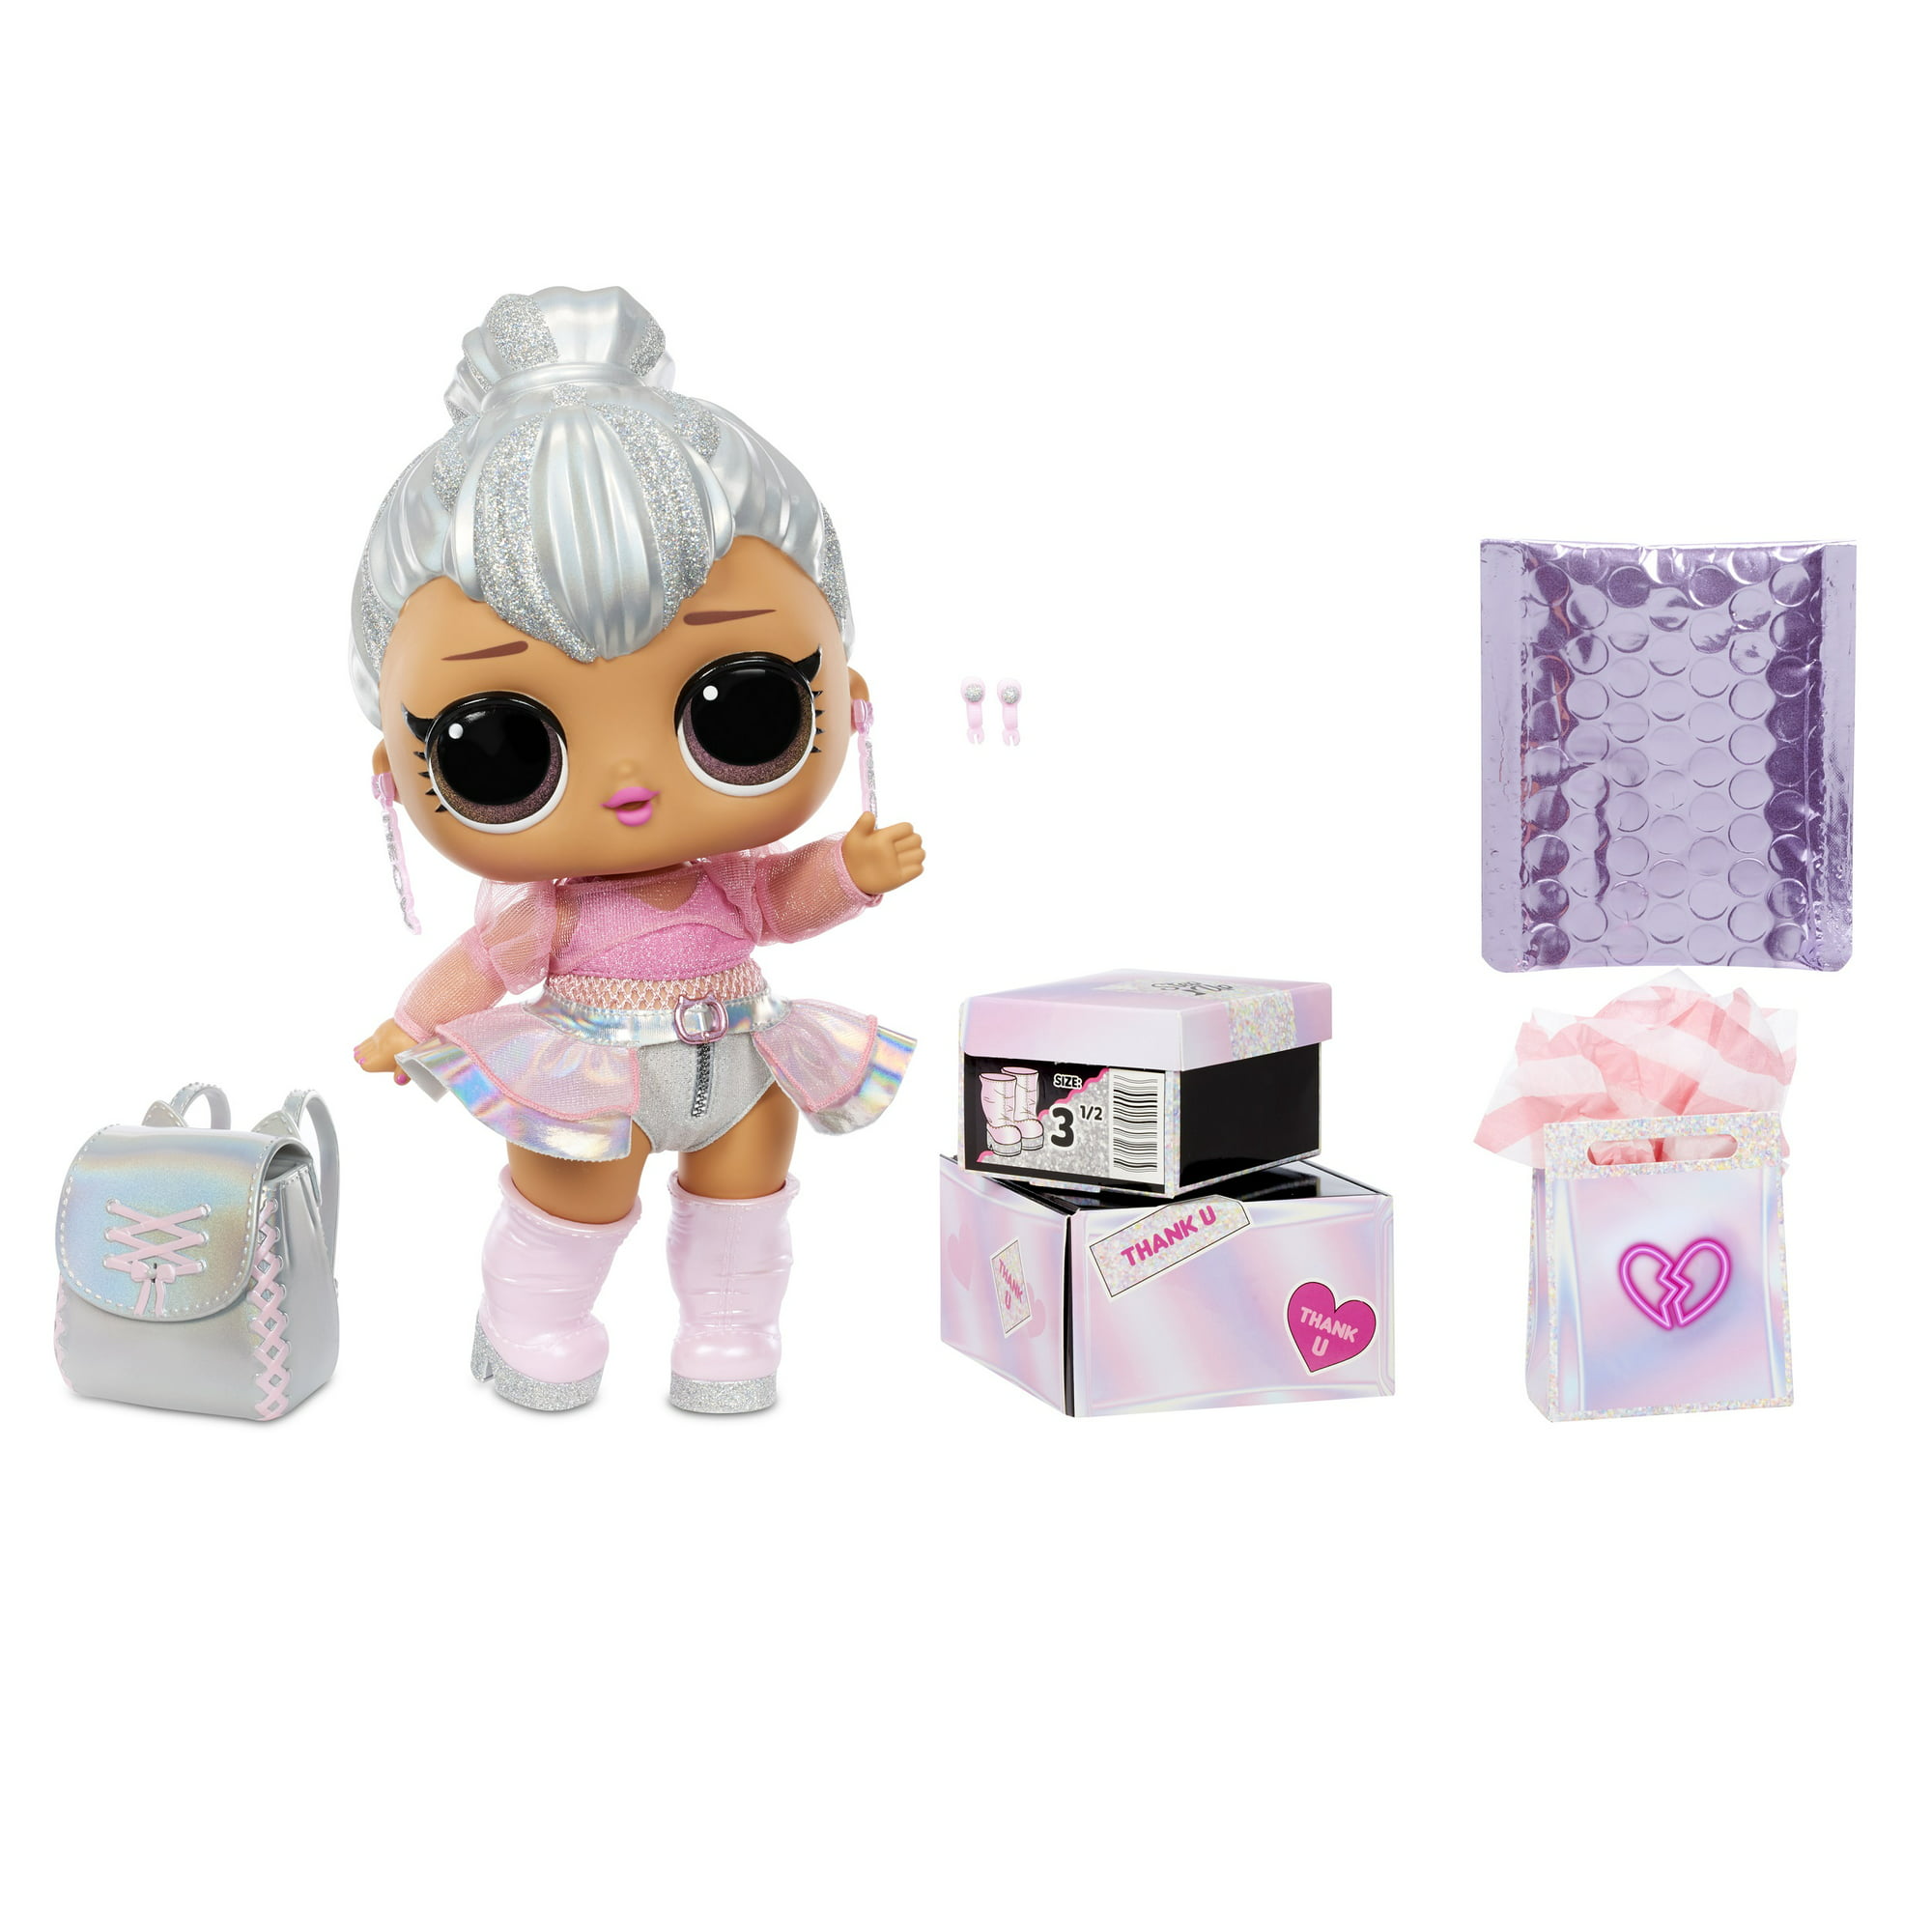 dramatiker indebære Harden LOL Surprise Big B.B. (Big Baby) Kitty Queen – 12" Large Doll, Unbox  Fashions, Shoes, Accessories, Includes Playset Desk, Chair and Backdrop -  Walmart.com